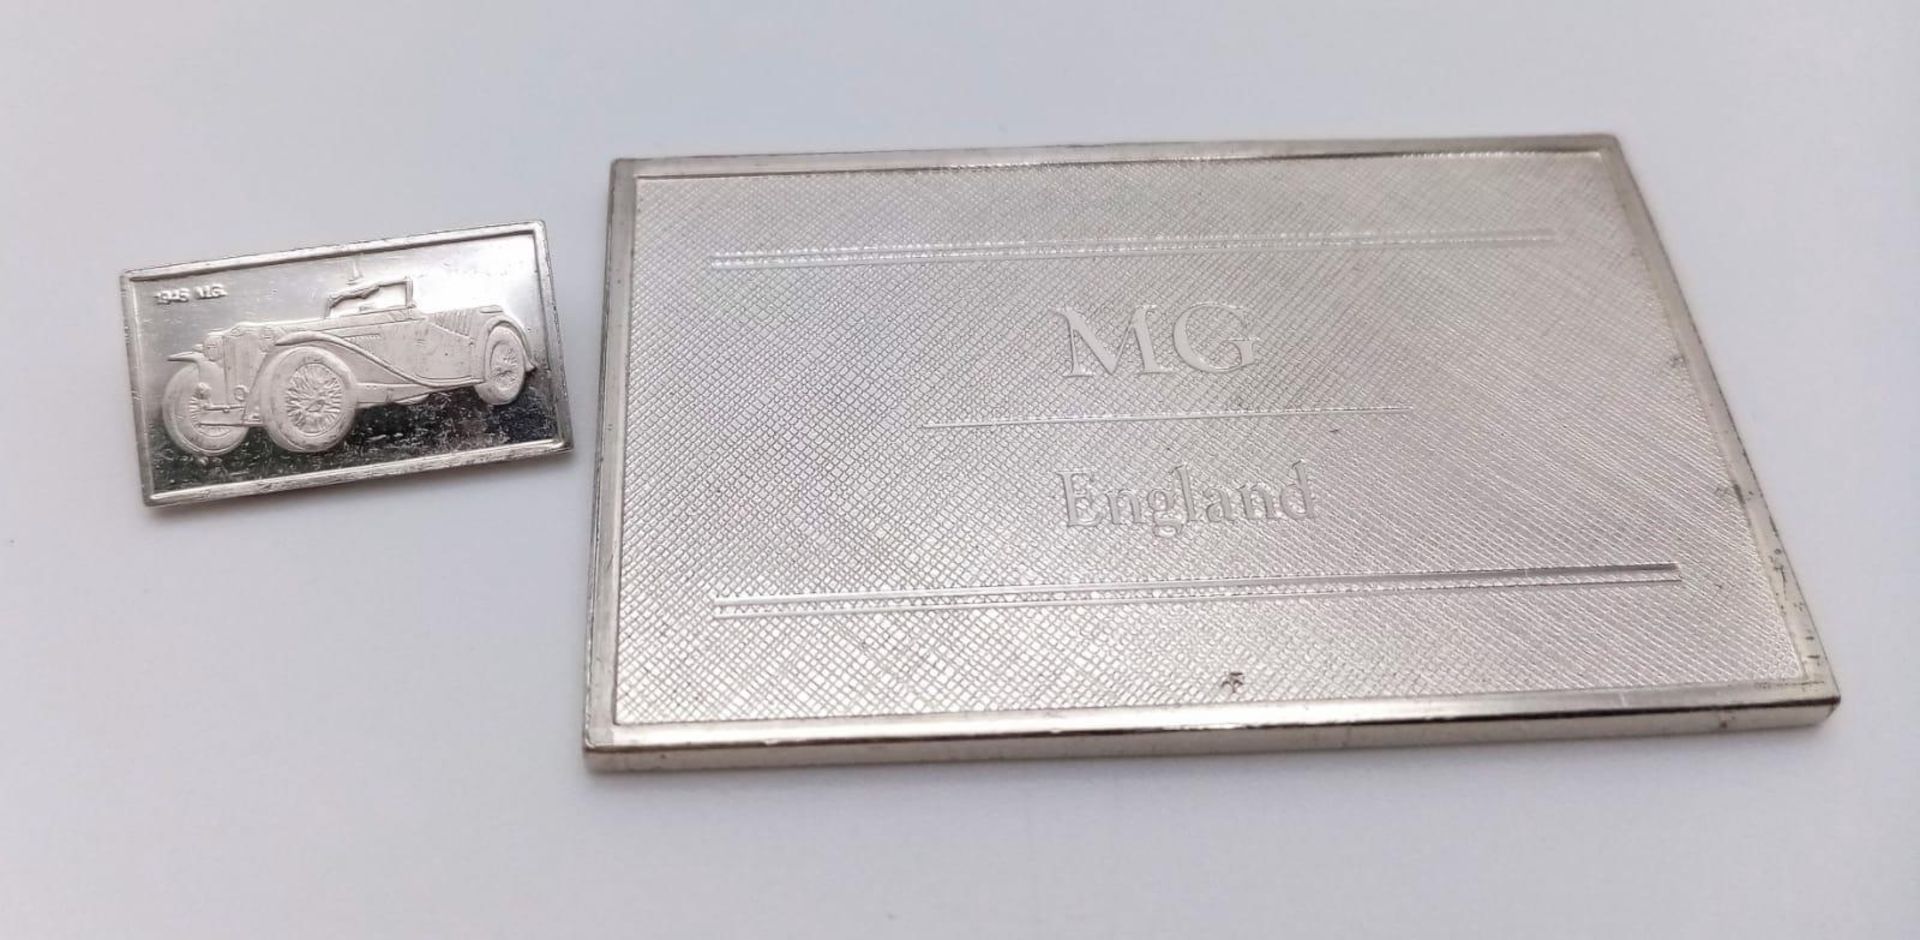 2 X STERLING SILVER AND ENAMEL MG CAR LOGO MANUFACTURER PLAQUES, MADE IN UNITED KINGDOM ENGLAND, - Image 2 of 4